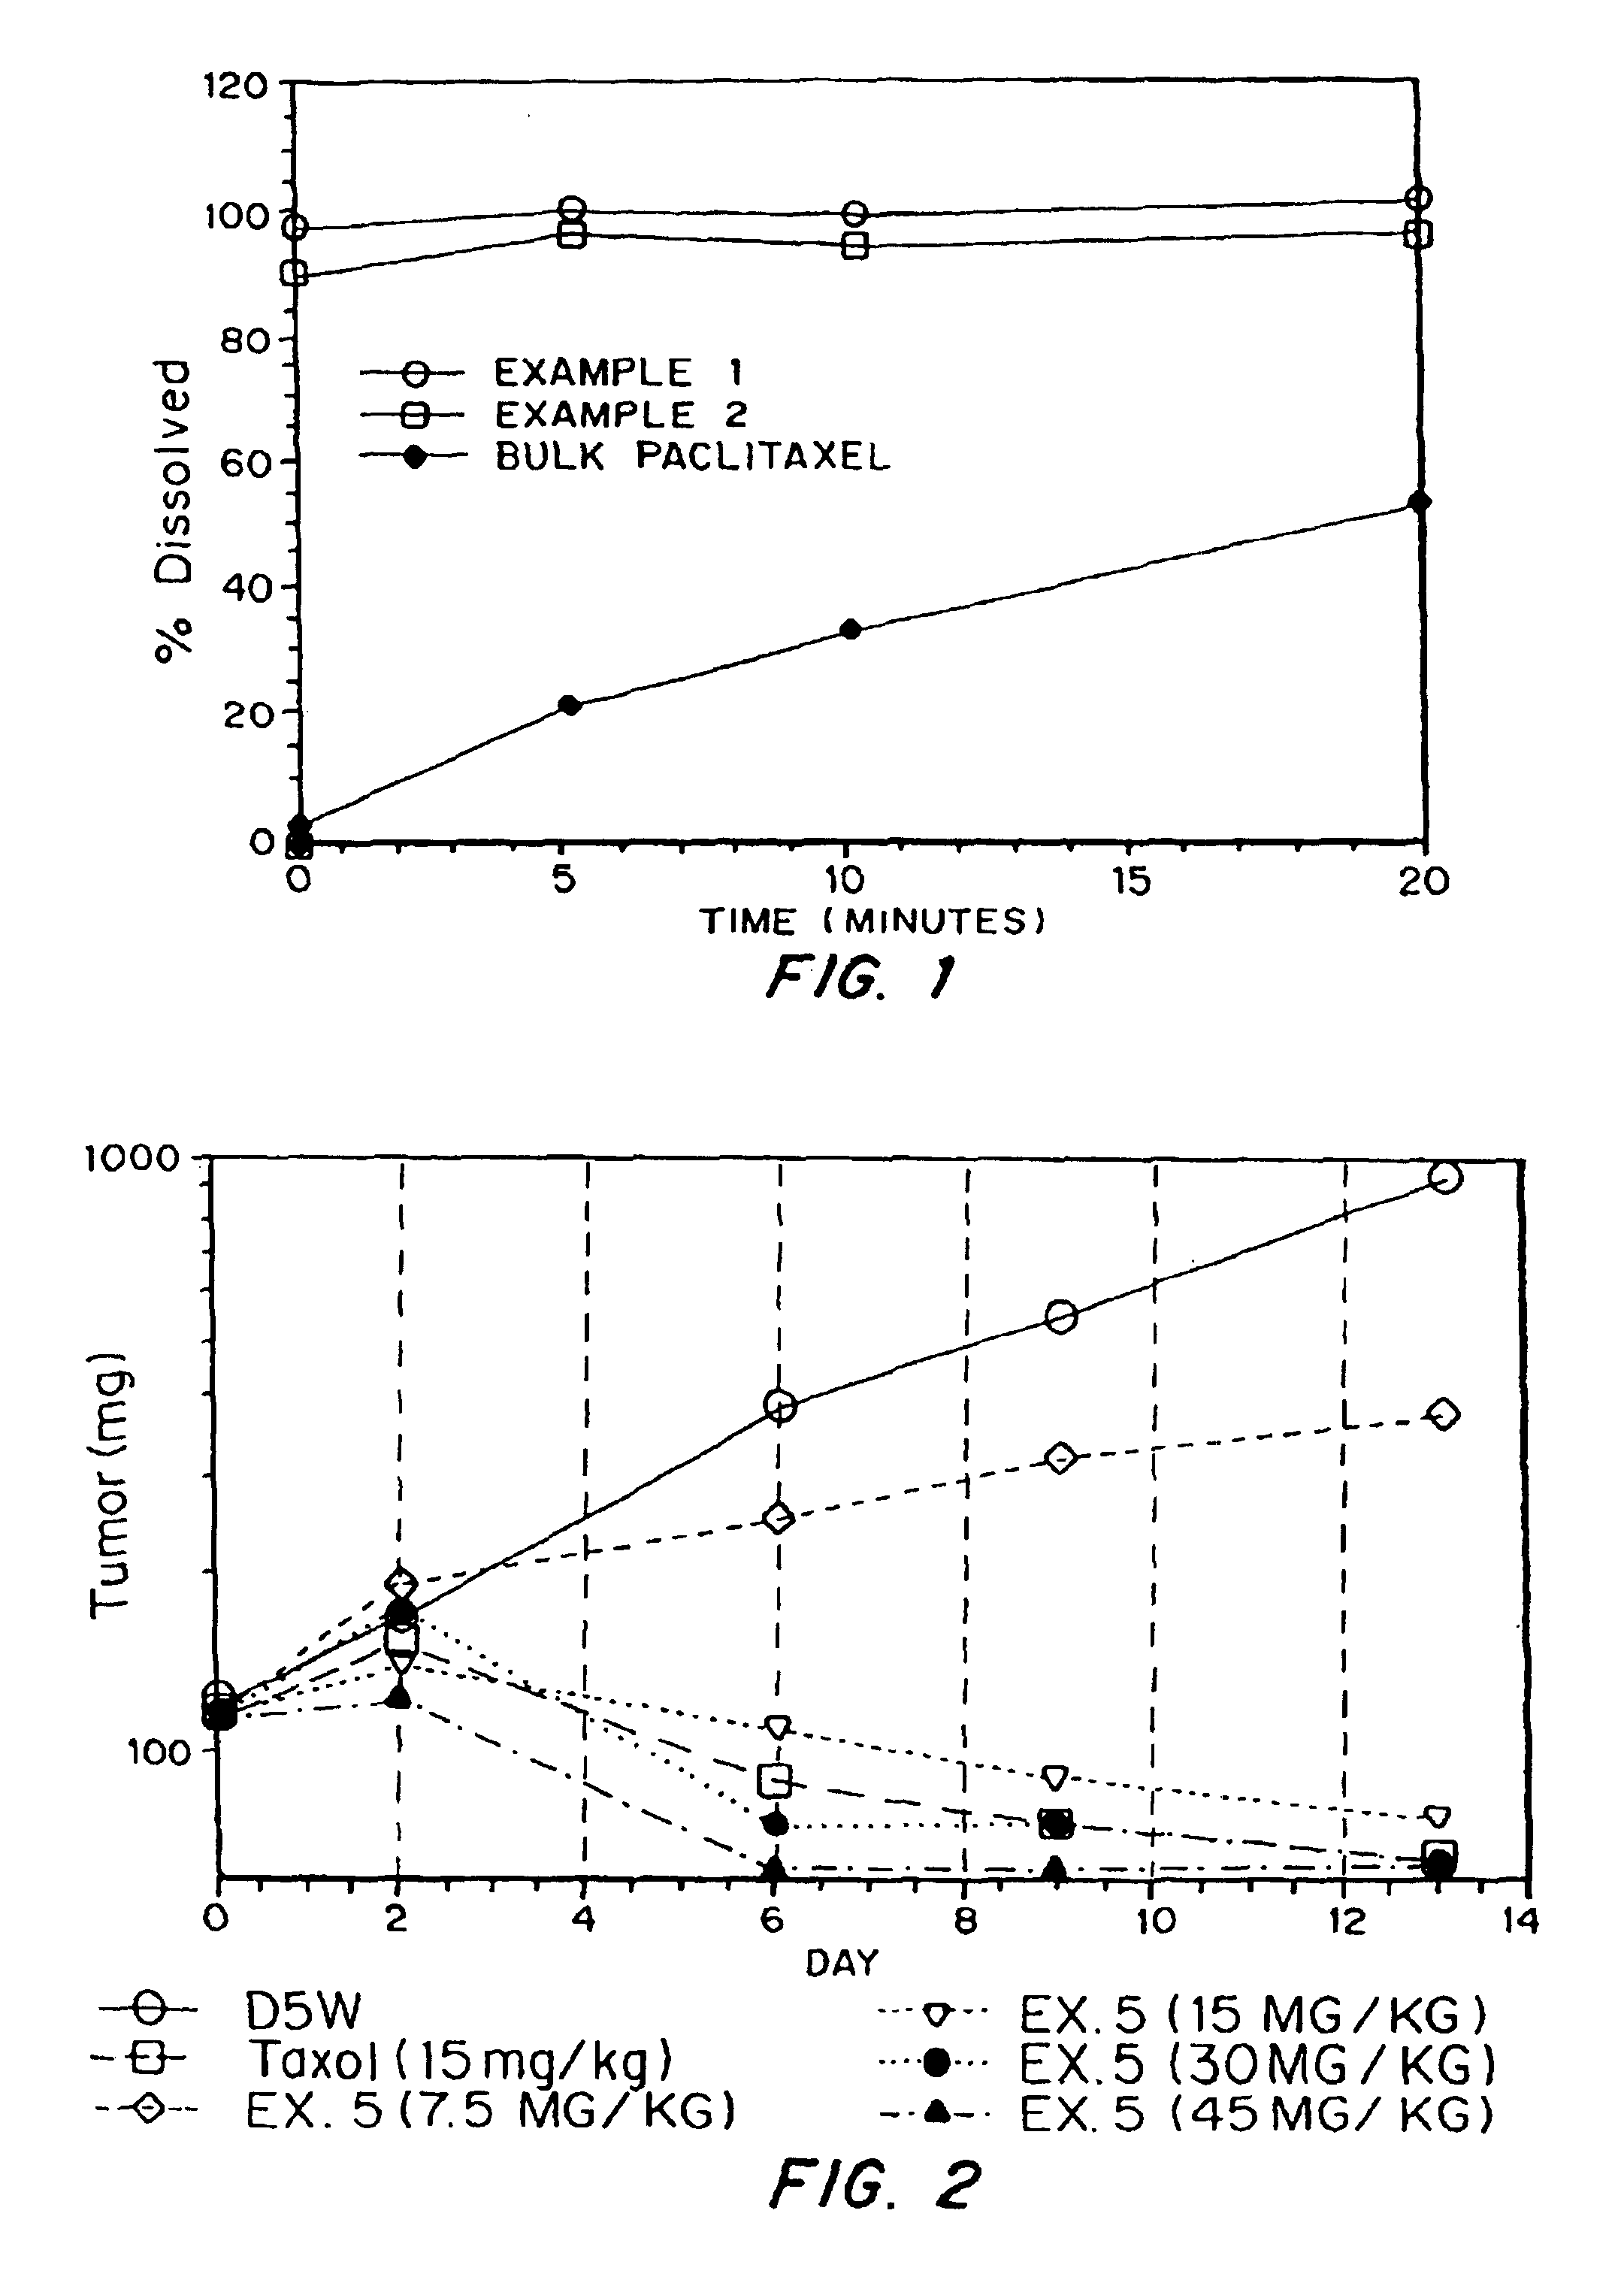 Porous paclitaxel matrices and methods of manufacture thereof